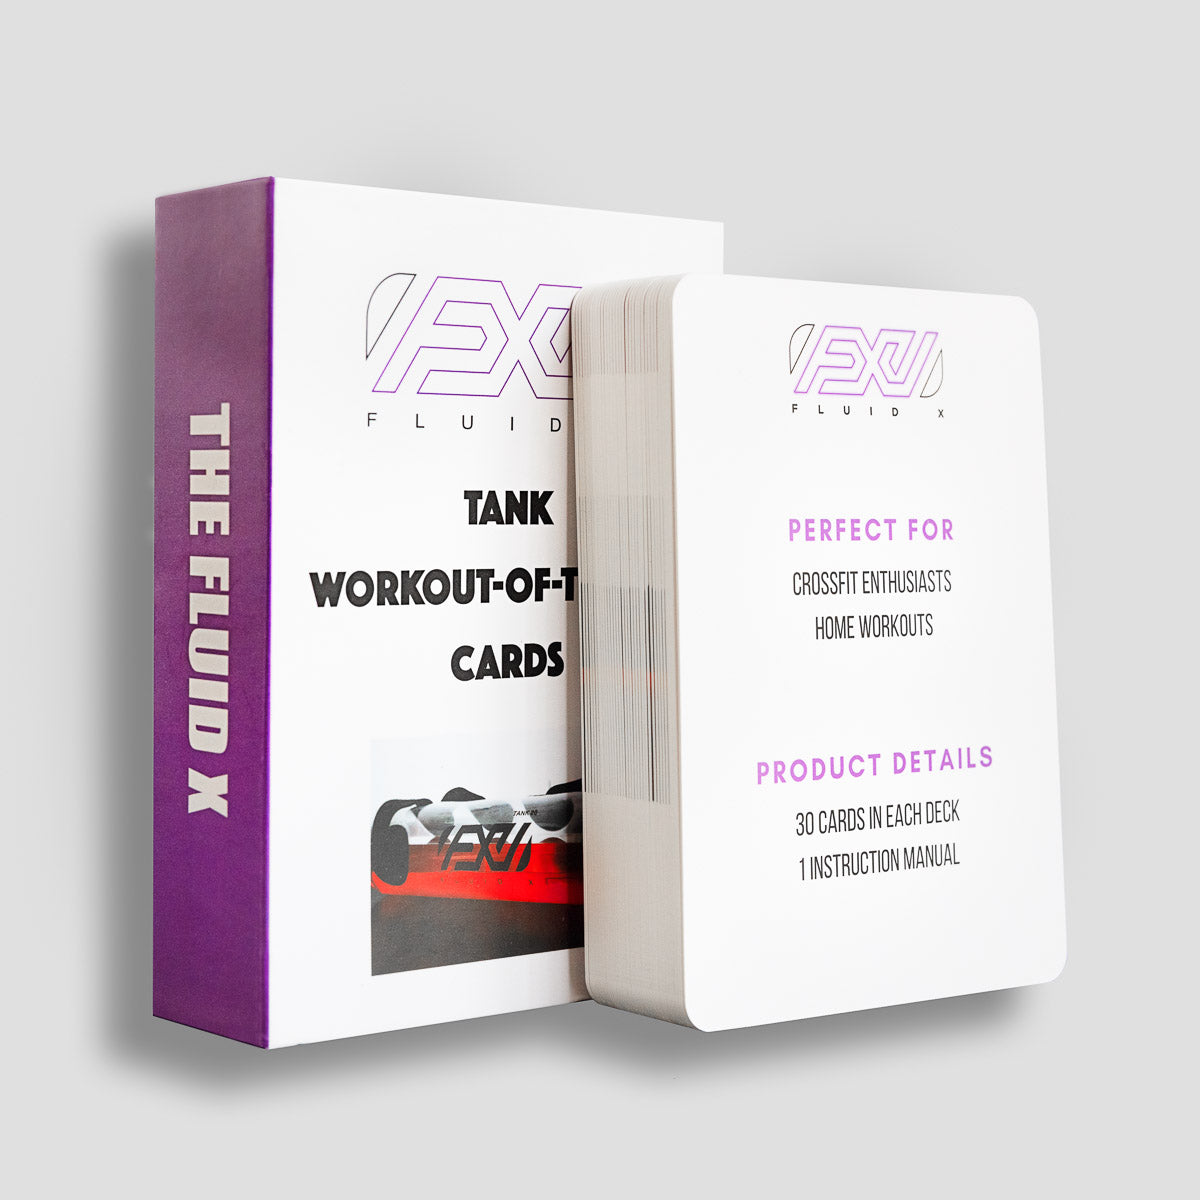 Workout-Of-the-Day (WOD) Tank Exercise Cards